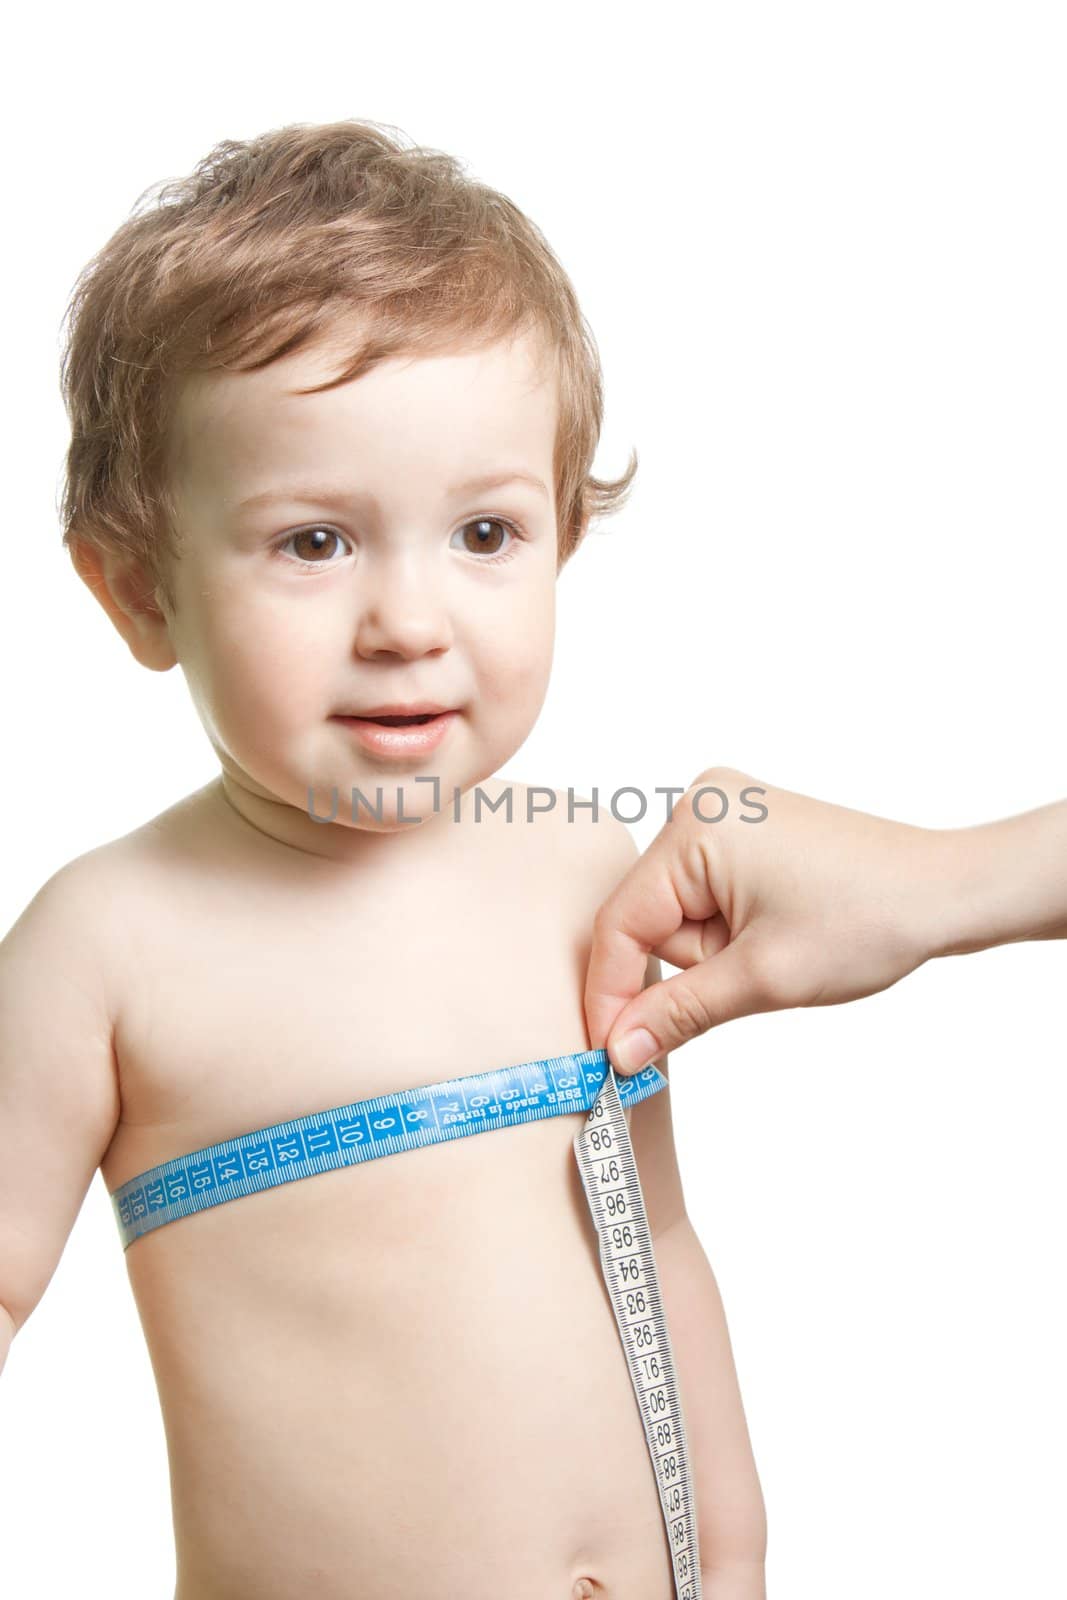 Measure tape in hand measuring human child chest